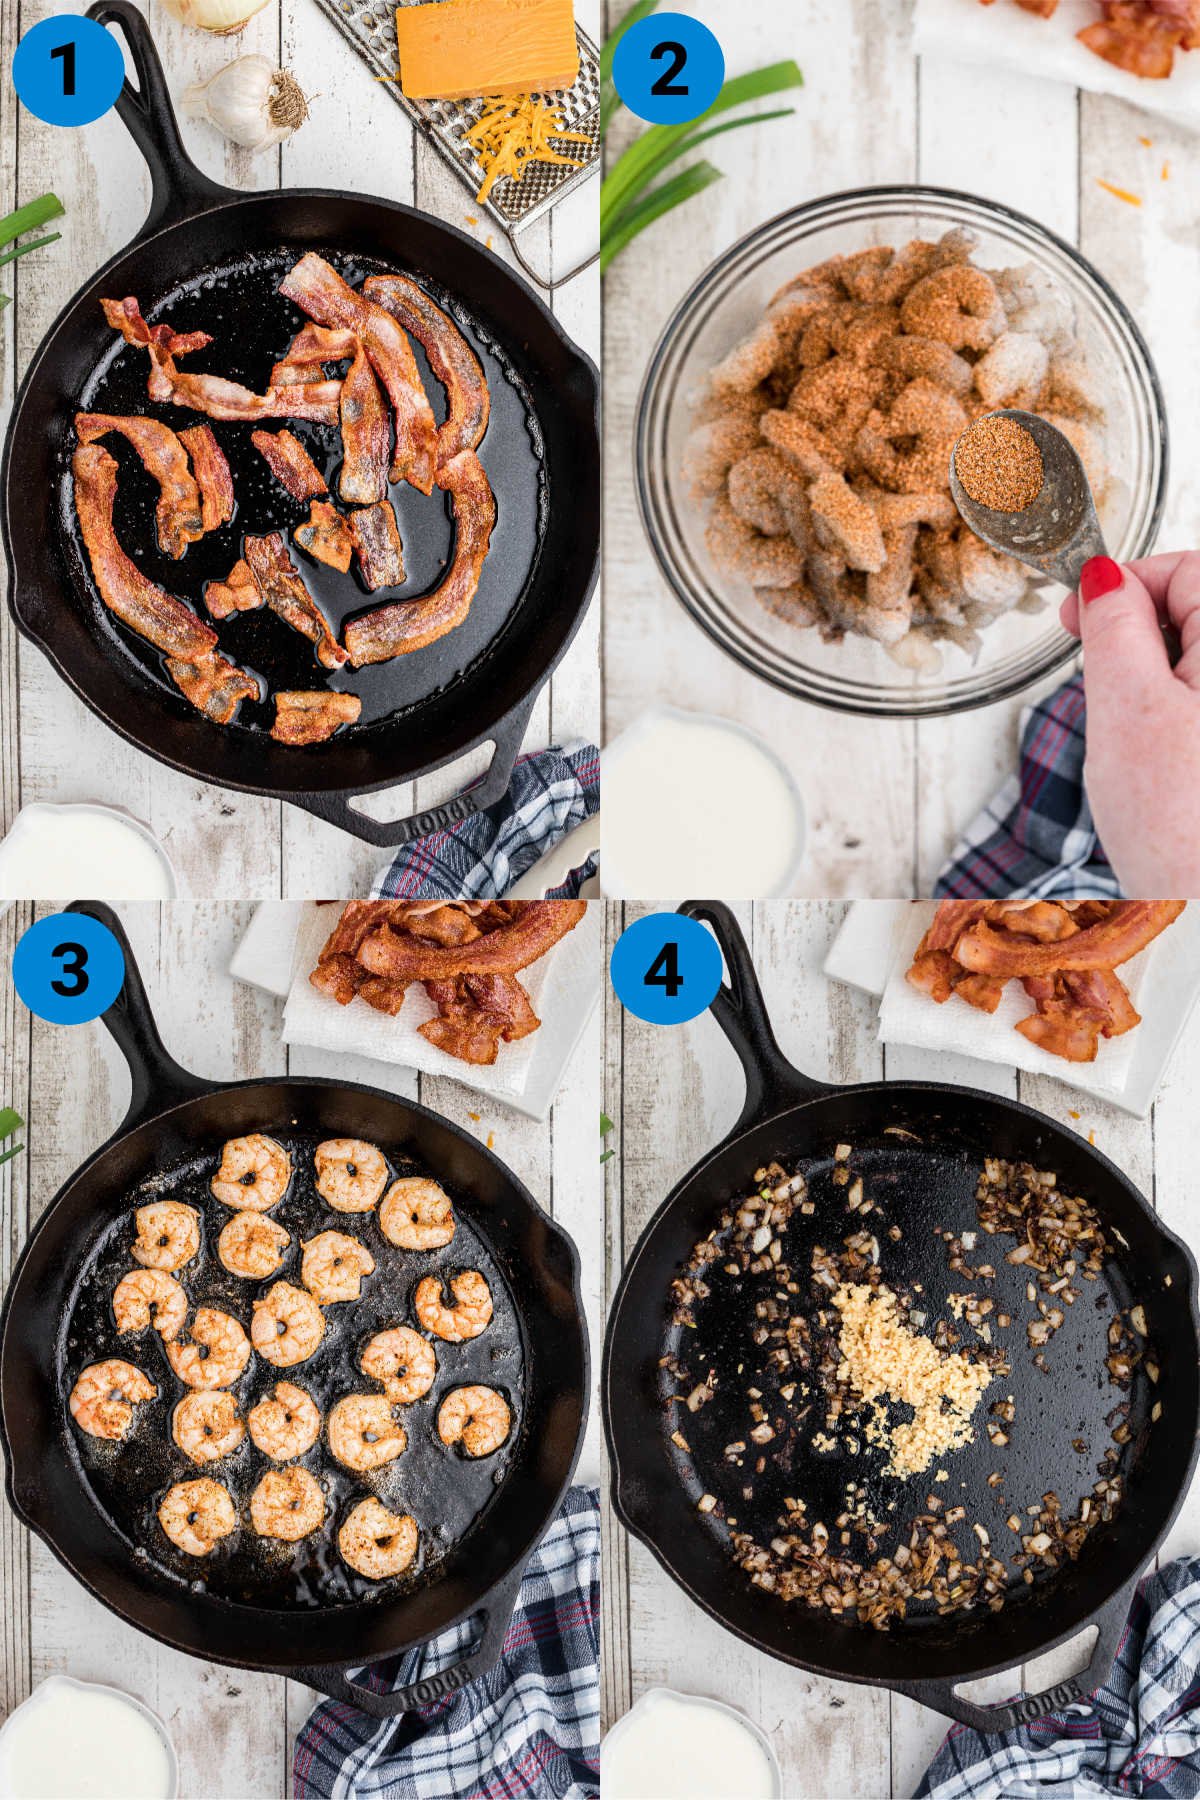 Collage of four images showing how to make Creole shrimp and grits.